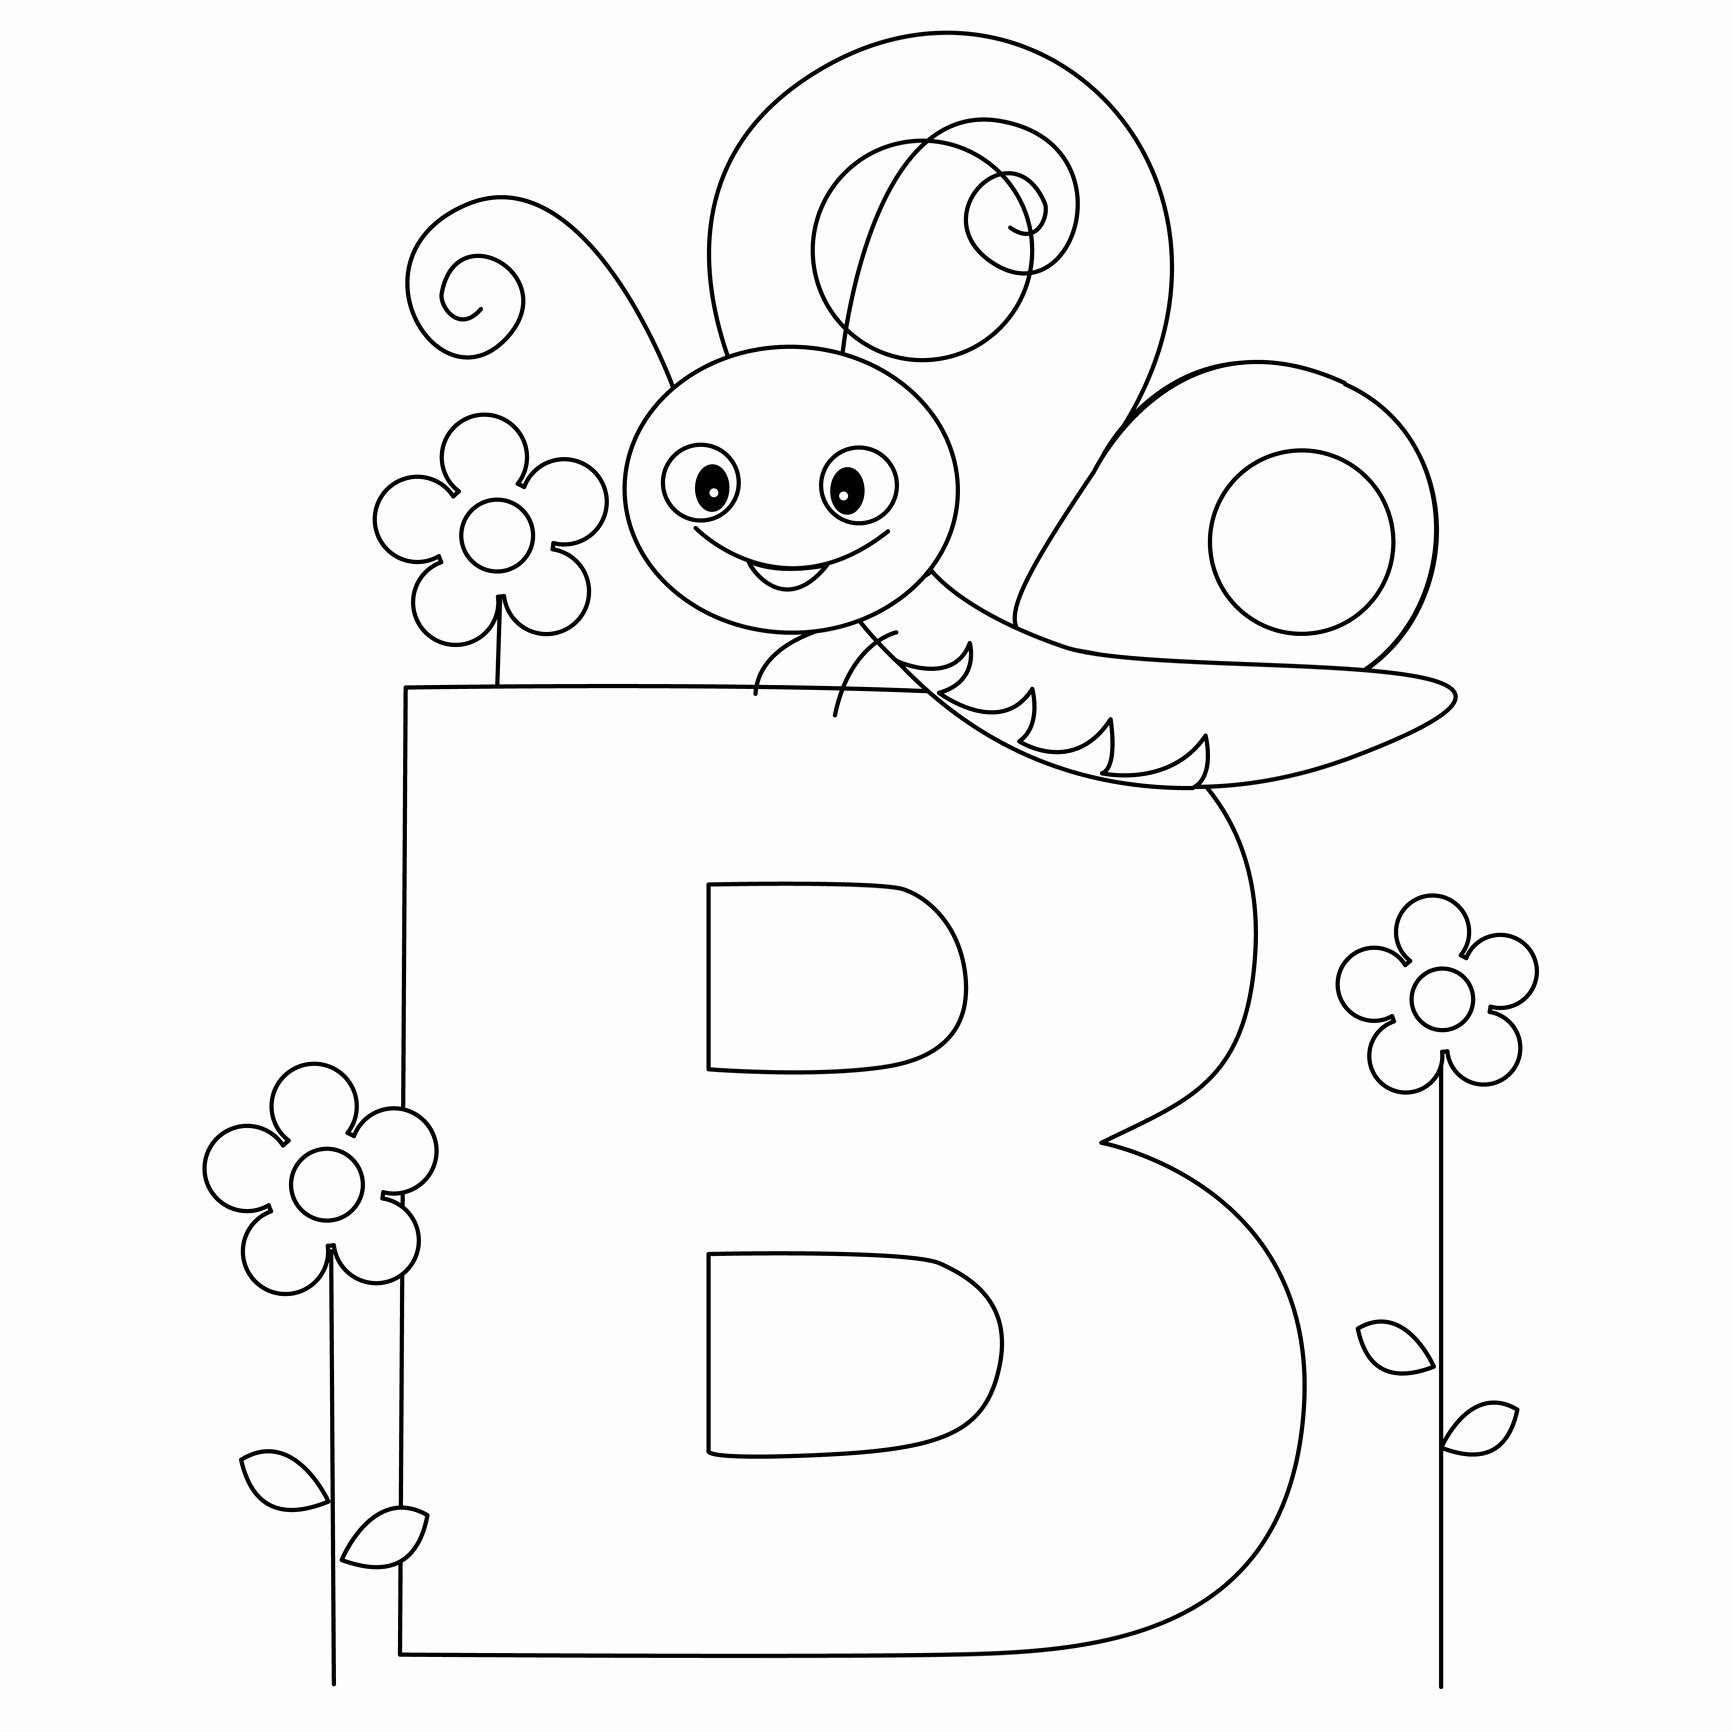 Alphabet Letters to Print Free Elegant Free Printable Alphabet Coloring Pages for Kids Best